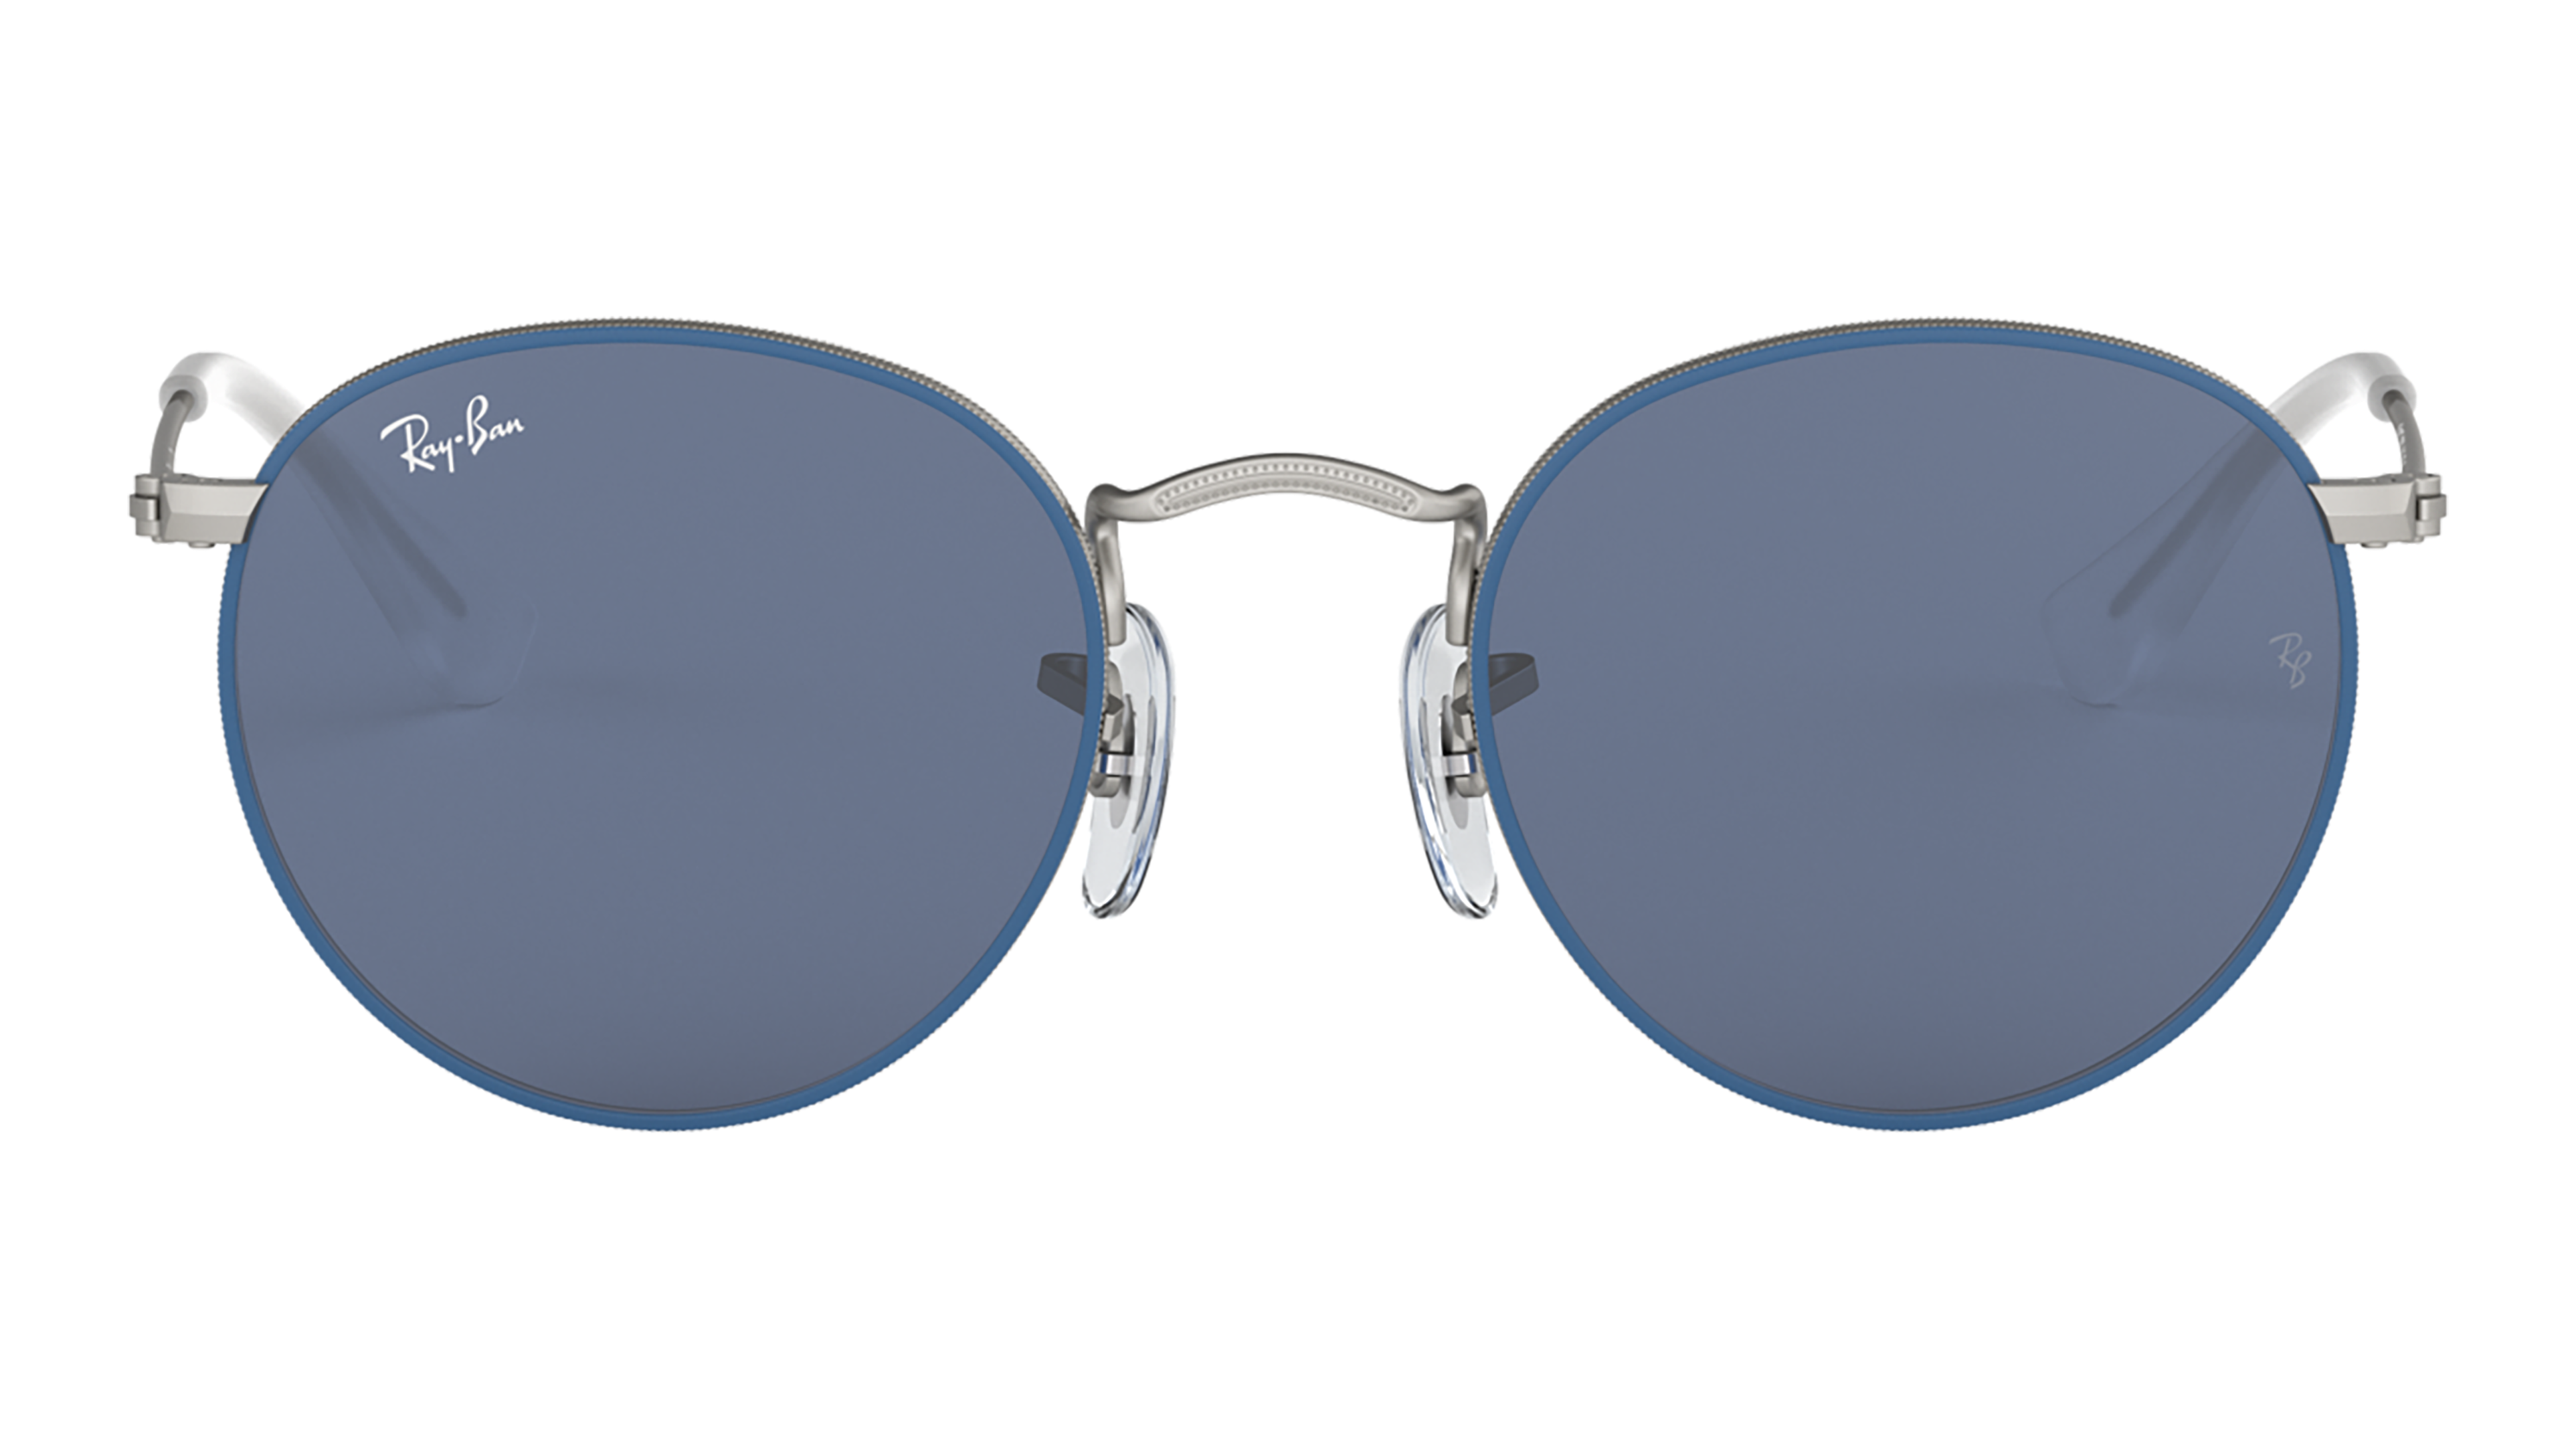 [products.image.front] Ray-Ban Junior Round Metal RJ9547S 280/80